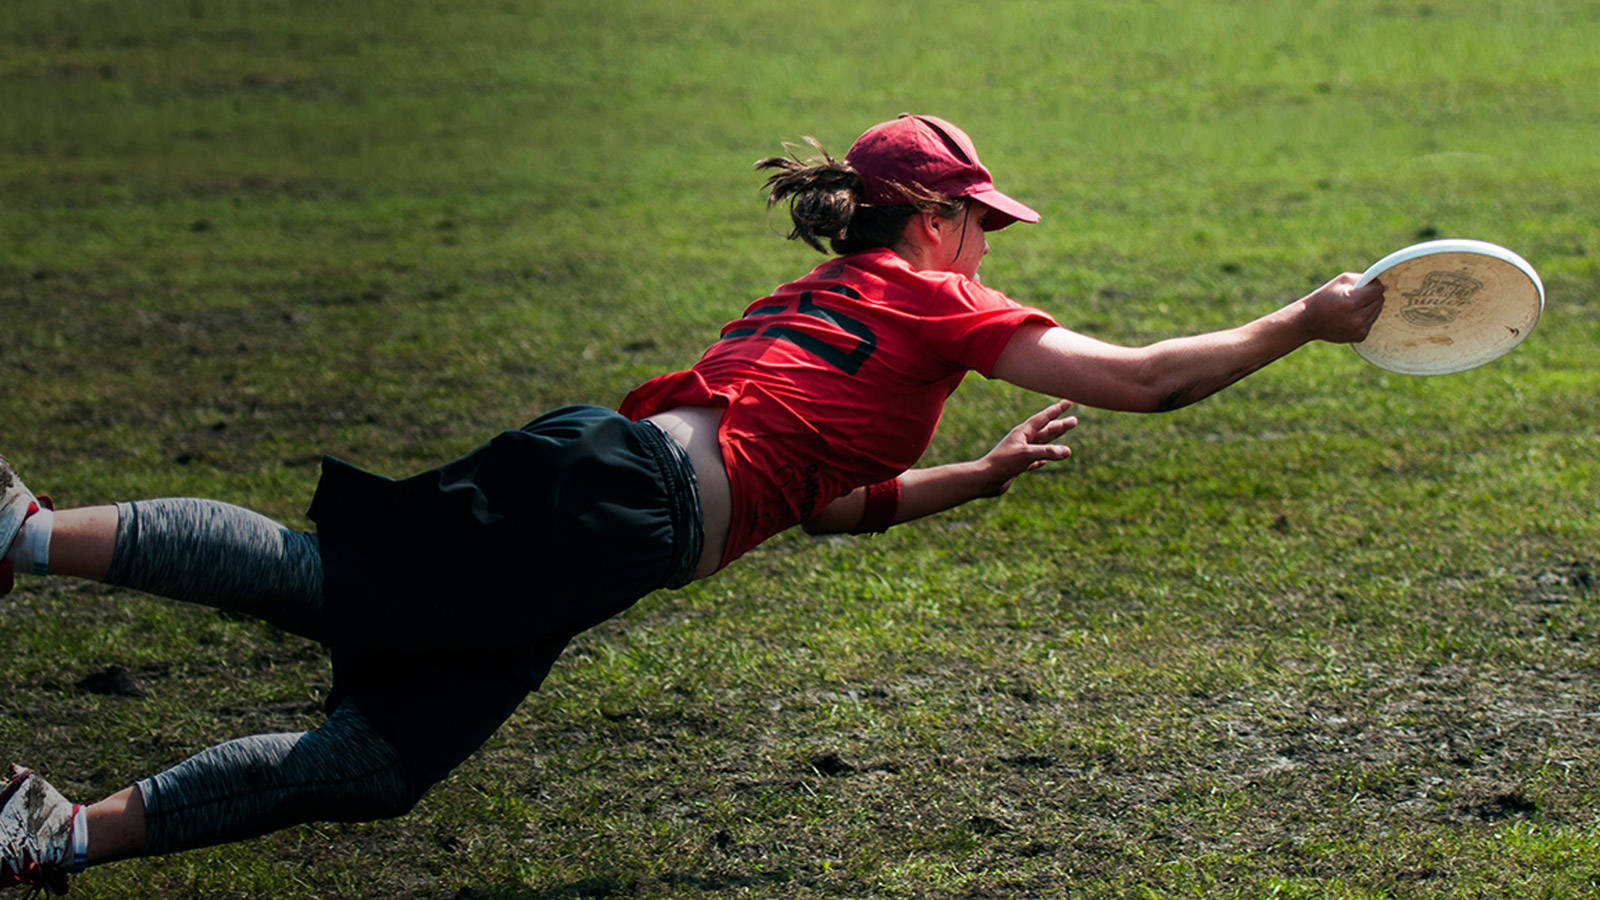 Woman Ultimate Frisbee Player Wallpaper